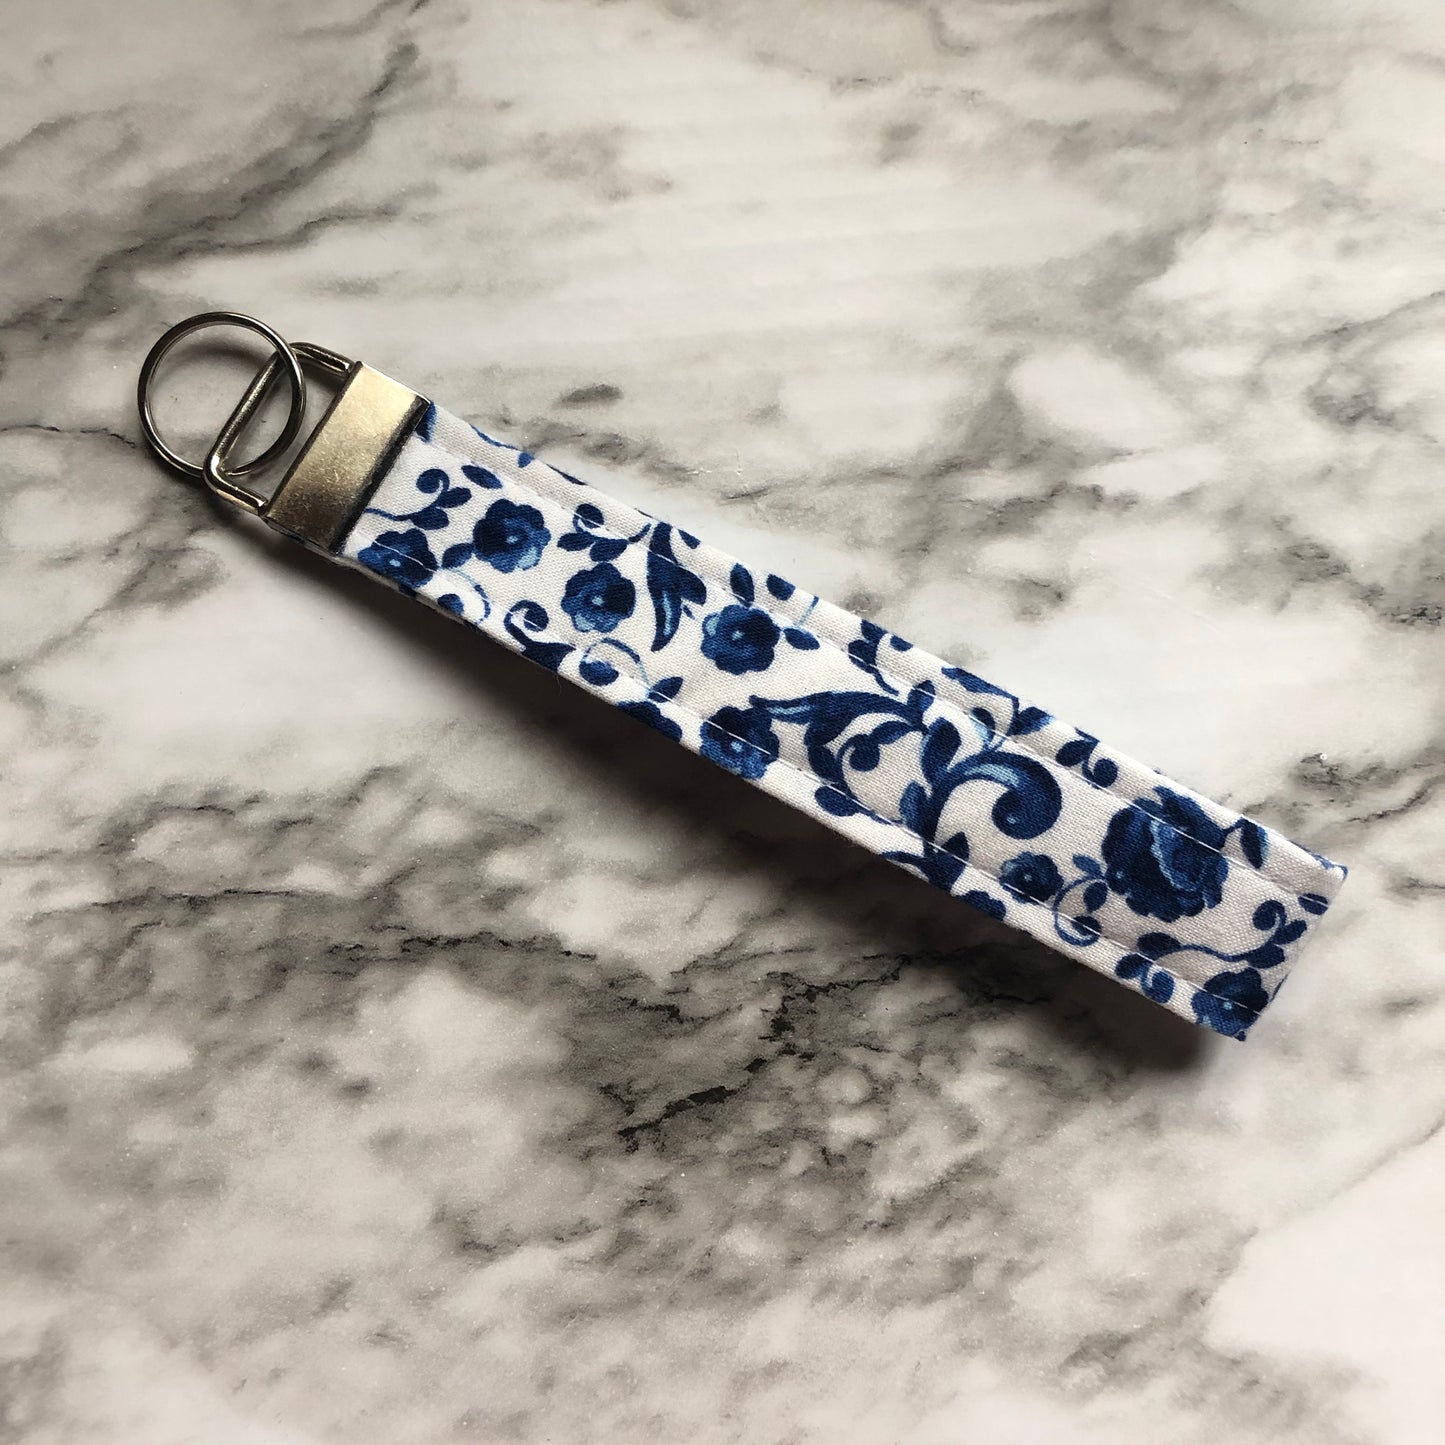 Blue and White Floral Print Fabric Wristlet Keychain, Key Fob